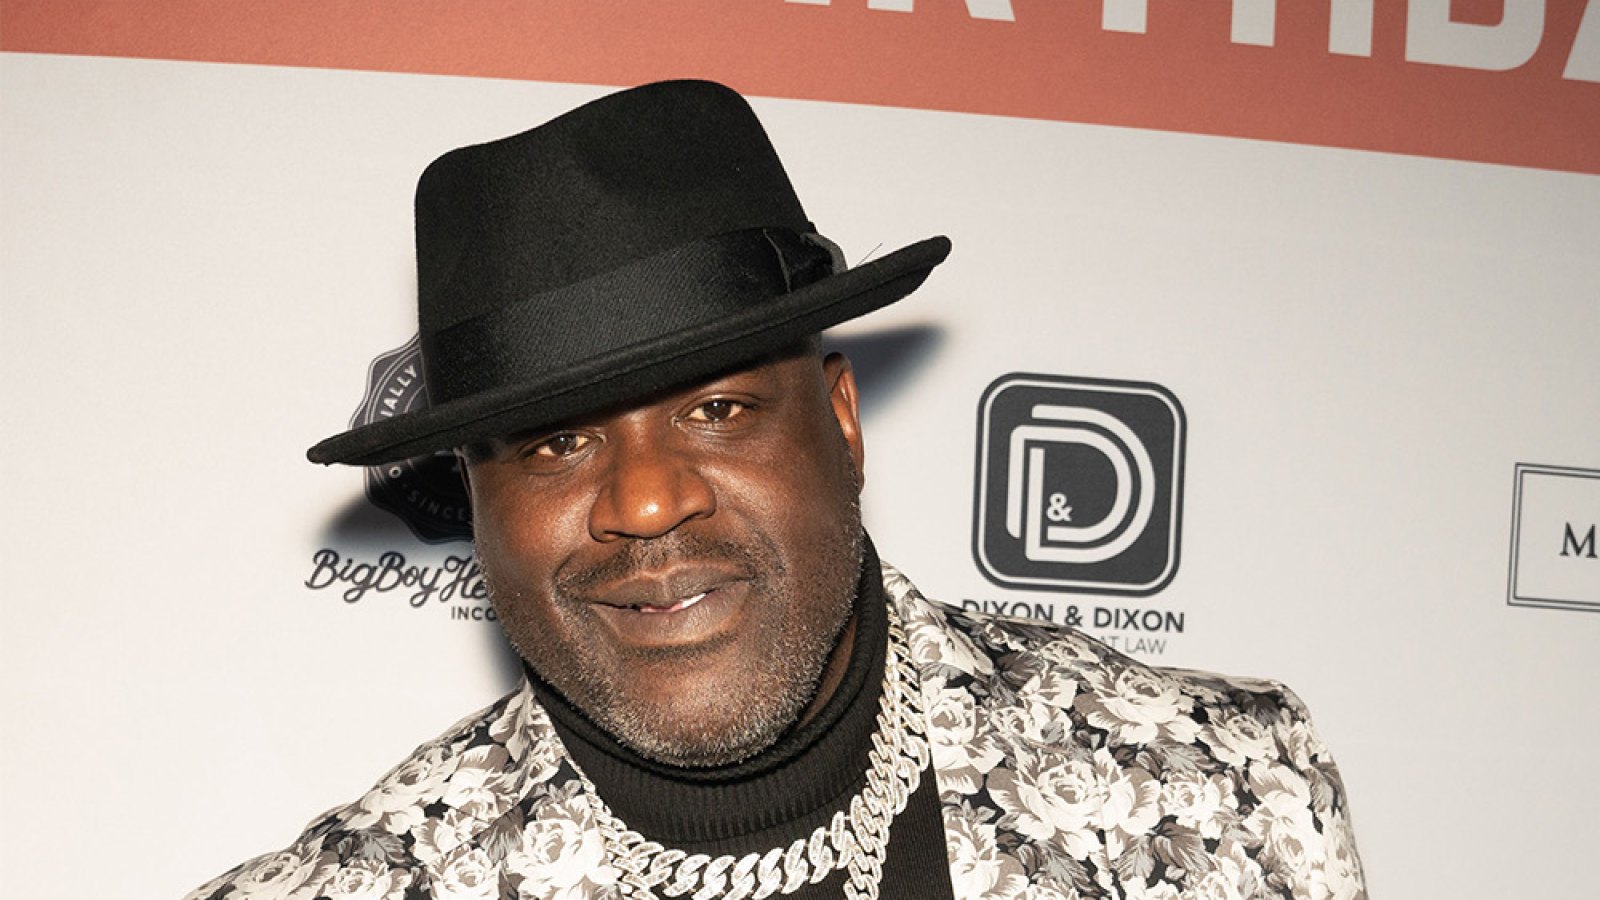 Shaquille O'Neal Raises Concern With Photo of Himself in a Hospital Bed: Details